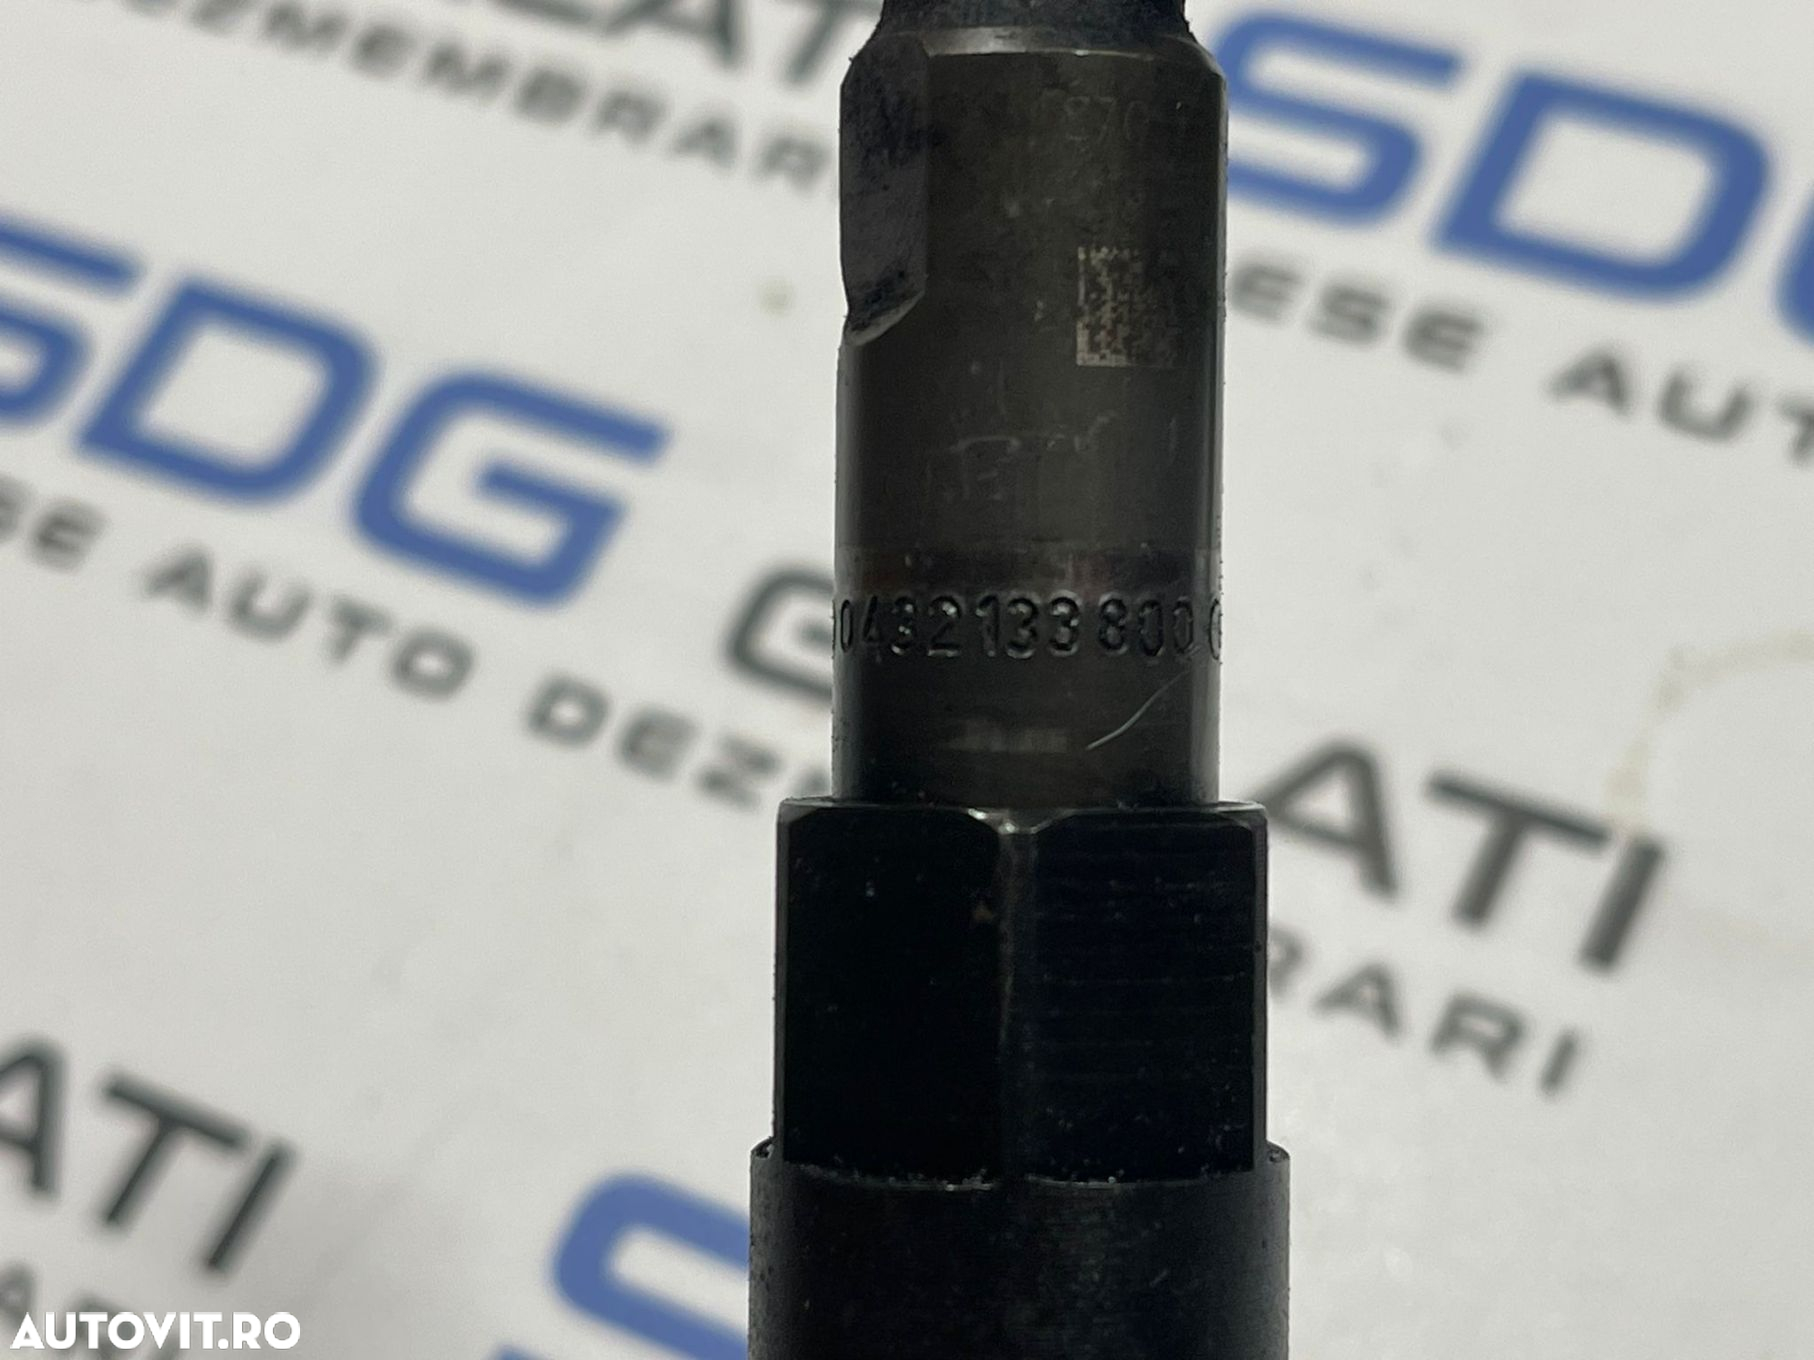 Injector Injectoare Ford Mondeo 2.0 TDCI 66KW 2000 - 2007 Cod 0432133800 1S7Q9-K546-BE [B2977] - 4